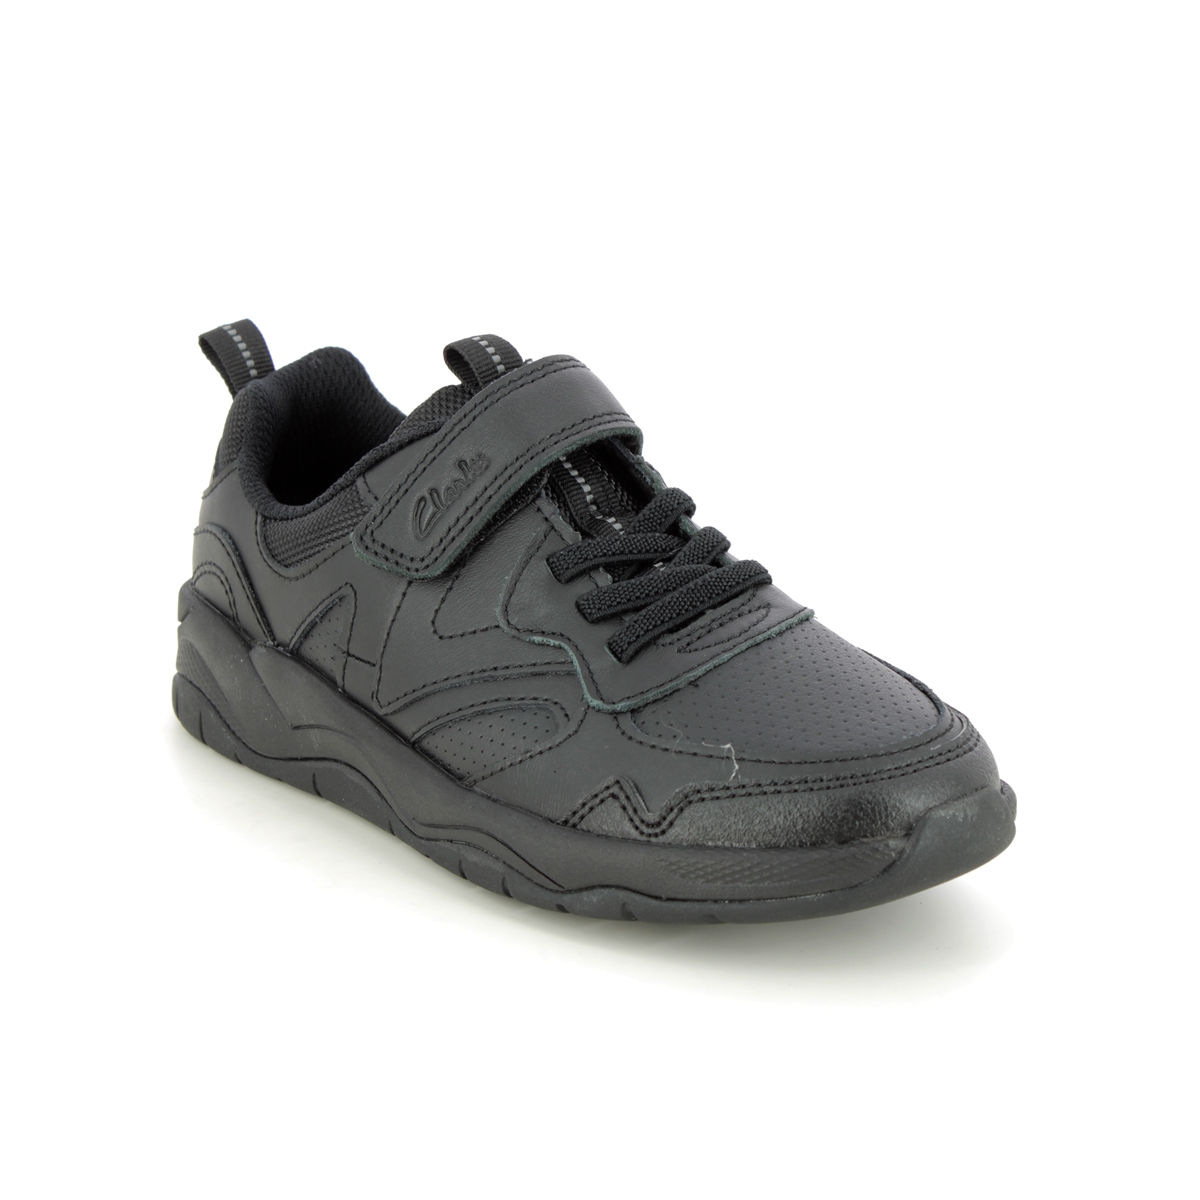 Clarks Clowder Sprint O Black Leather Kids Boys Shoes 661706F In Size 4 In Plain Black Leather F Width Fitting Regular Fit For School For kids